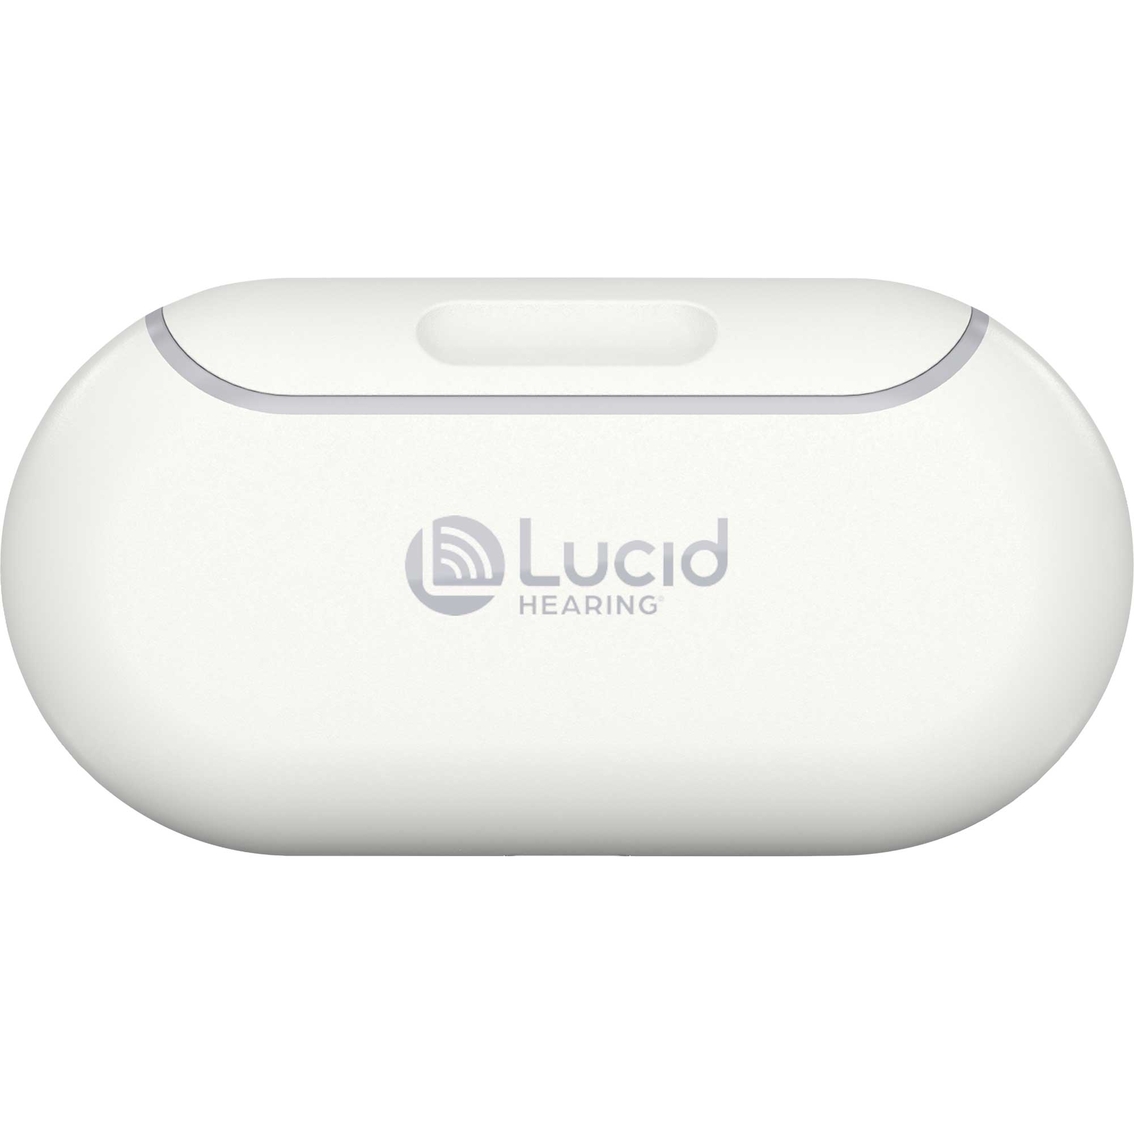 Lucid Hearing Fio In Canal Rechargeable Hearing Aids - Image 3 of 6